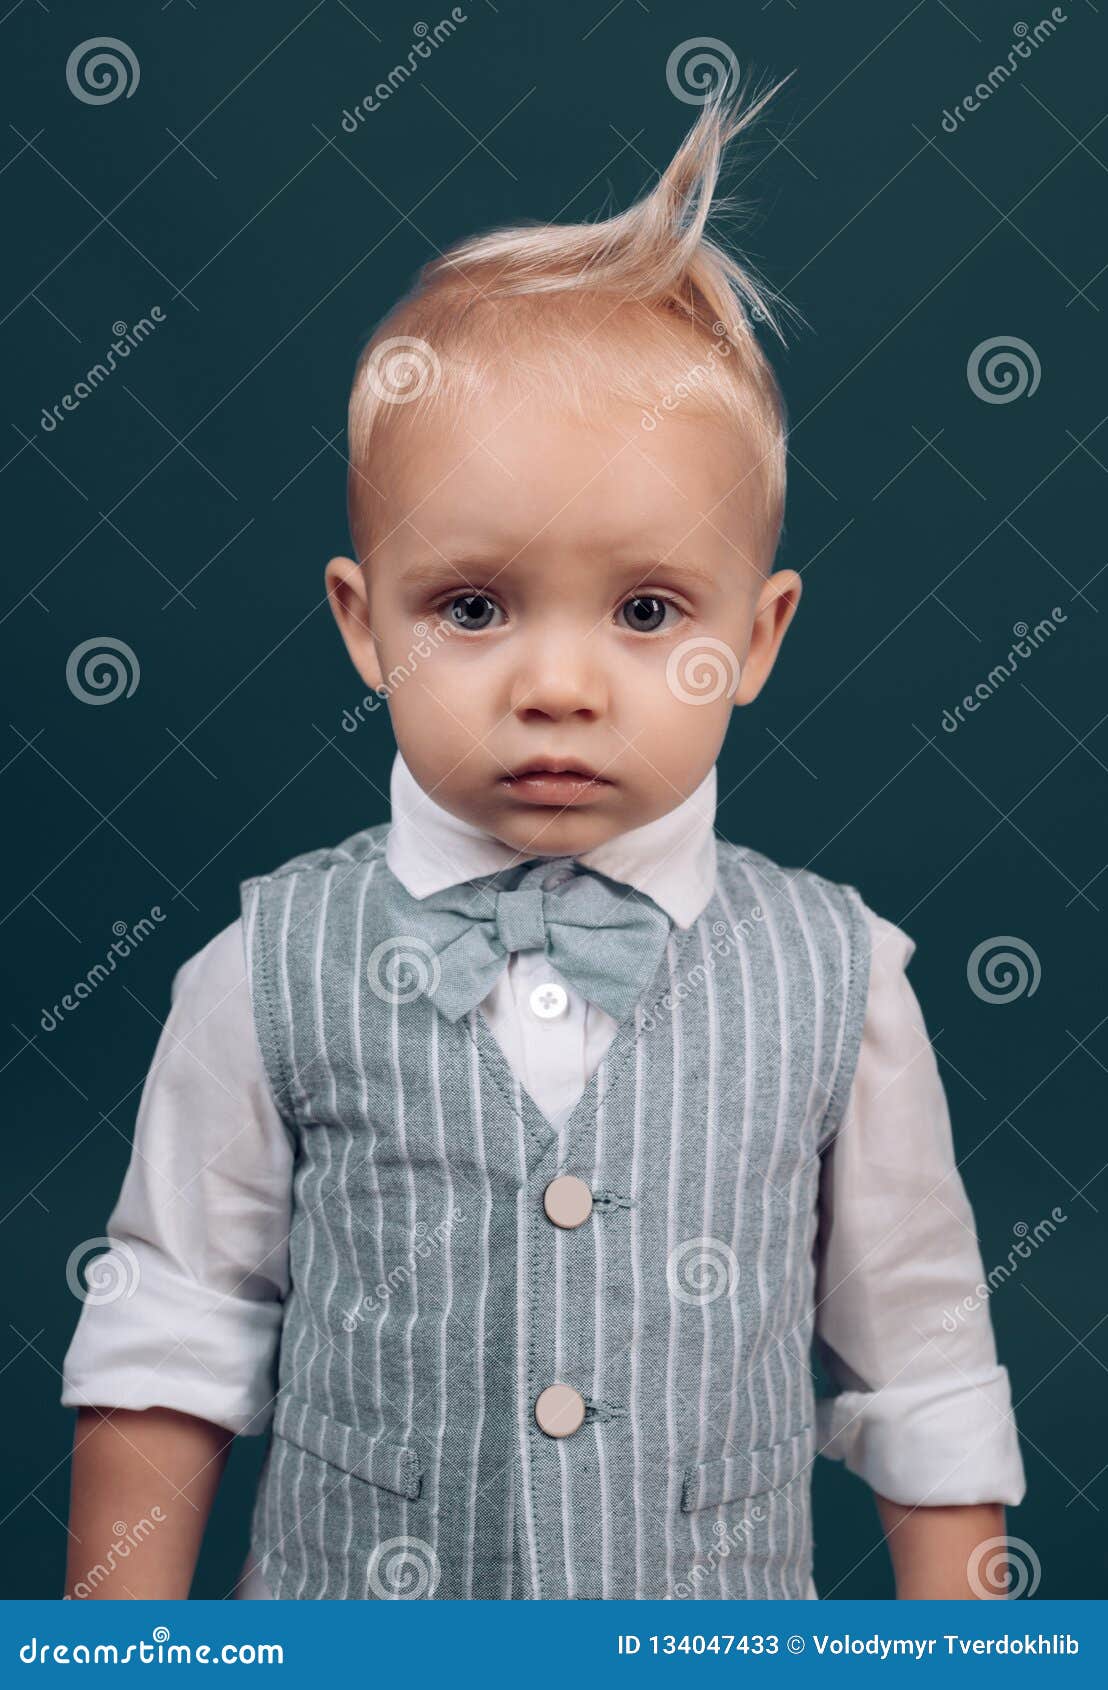 The Joy of Best Hair. Little Child with Short Haircut. Boy Child with  Stylish Blond Hair Stock Image - Image of styling, blonde: 134047433